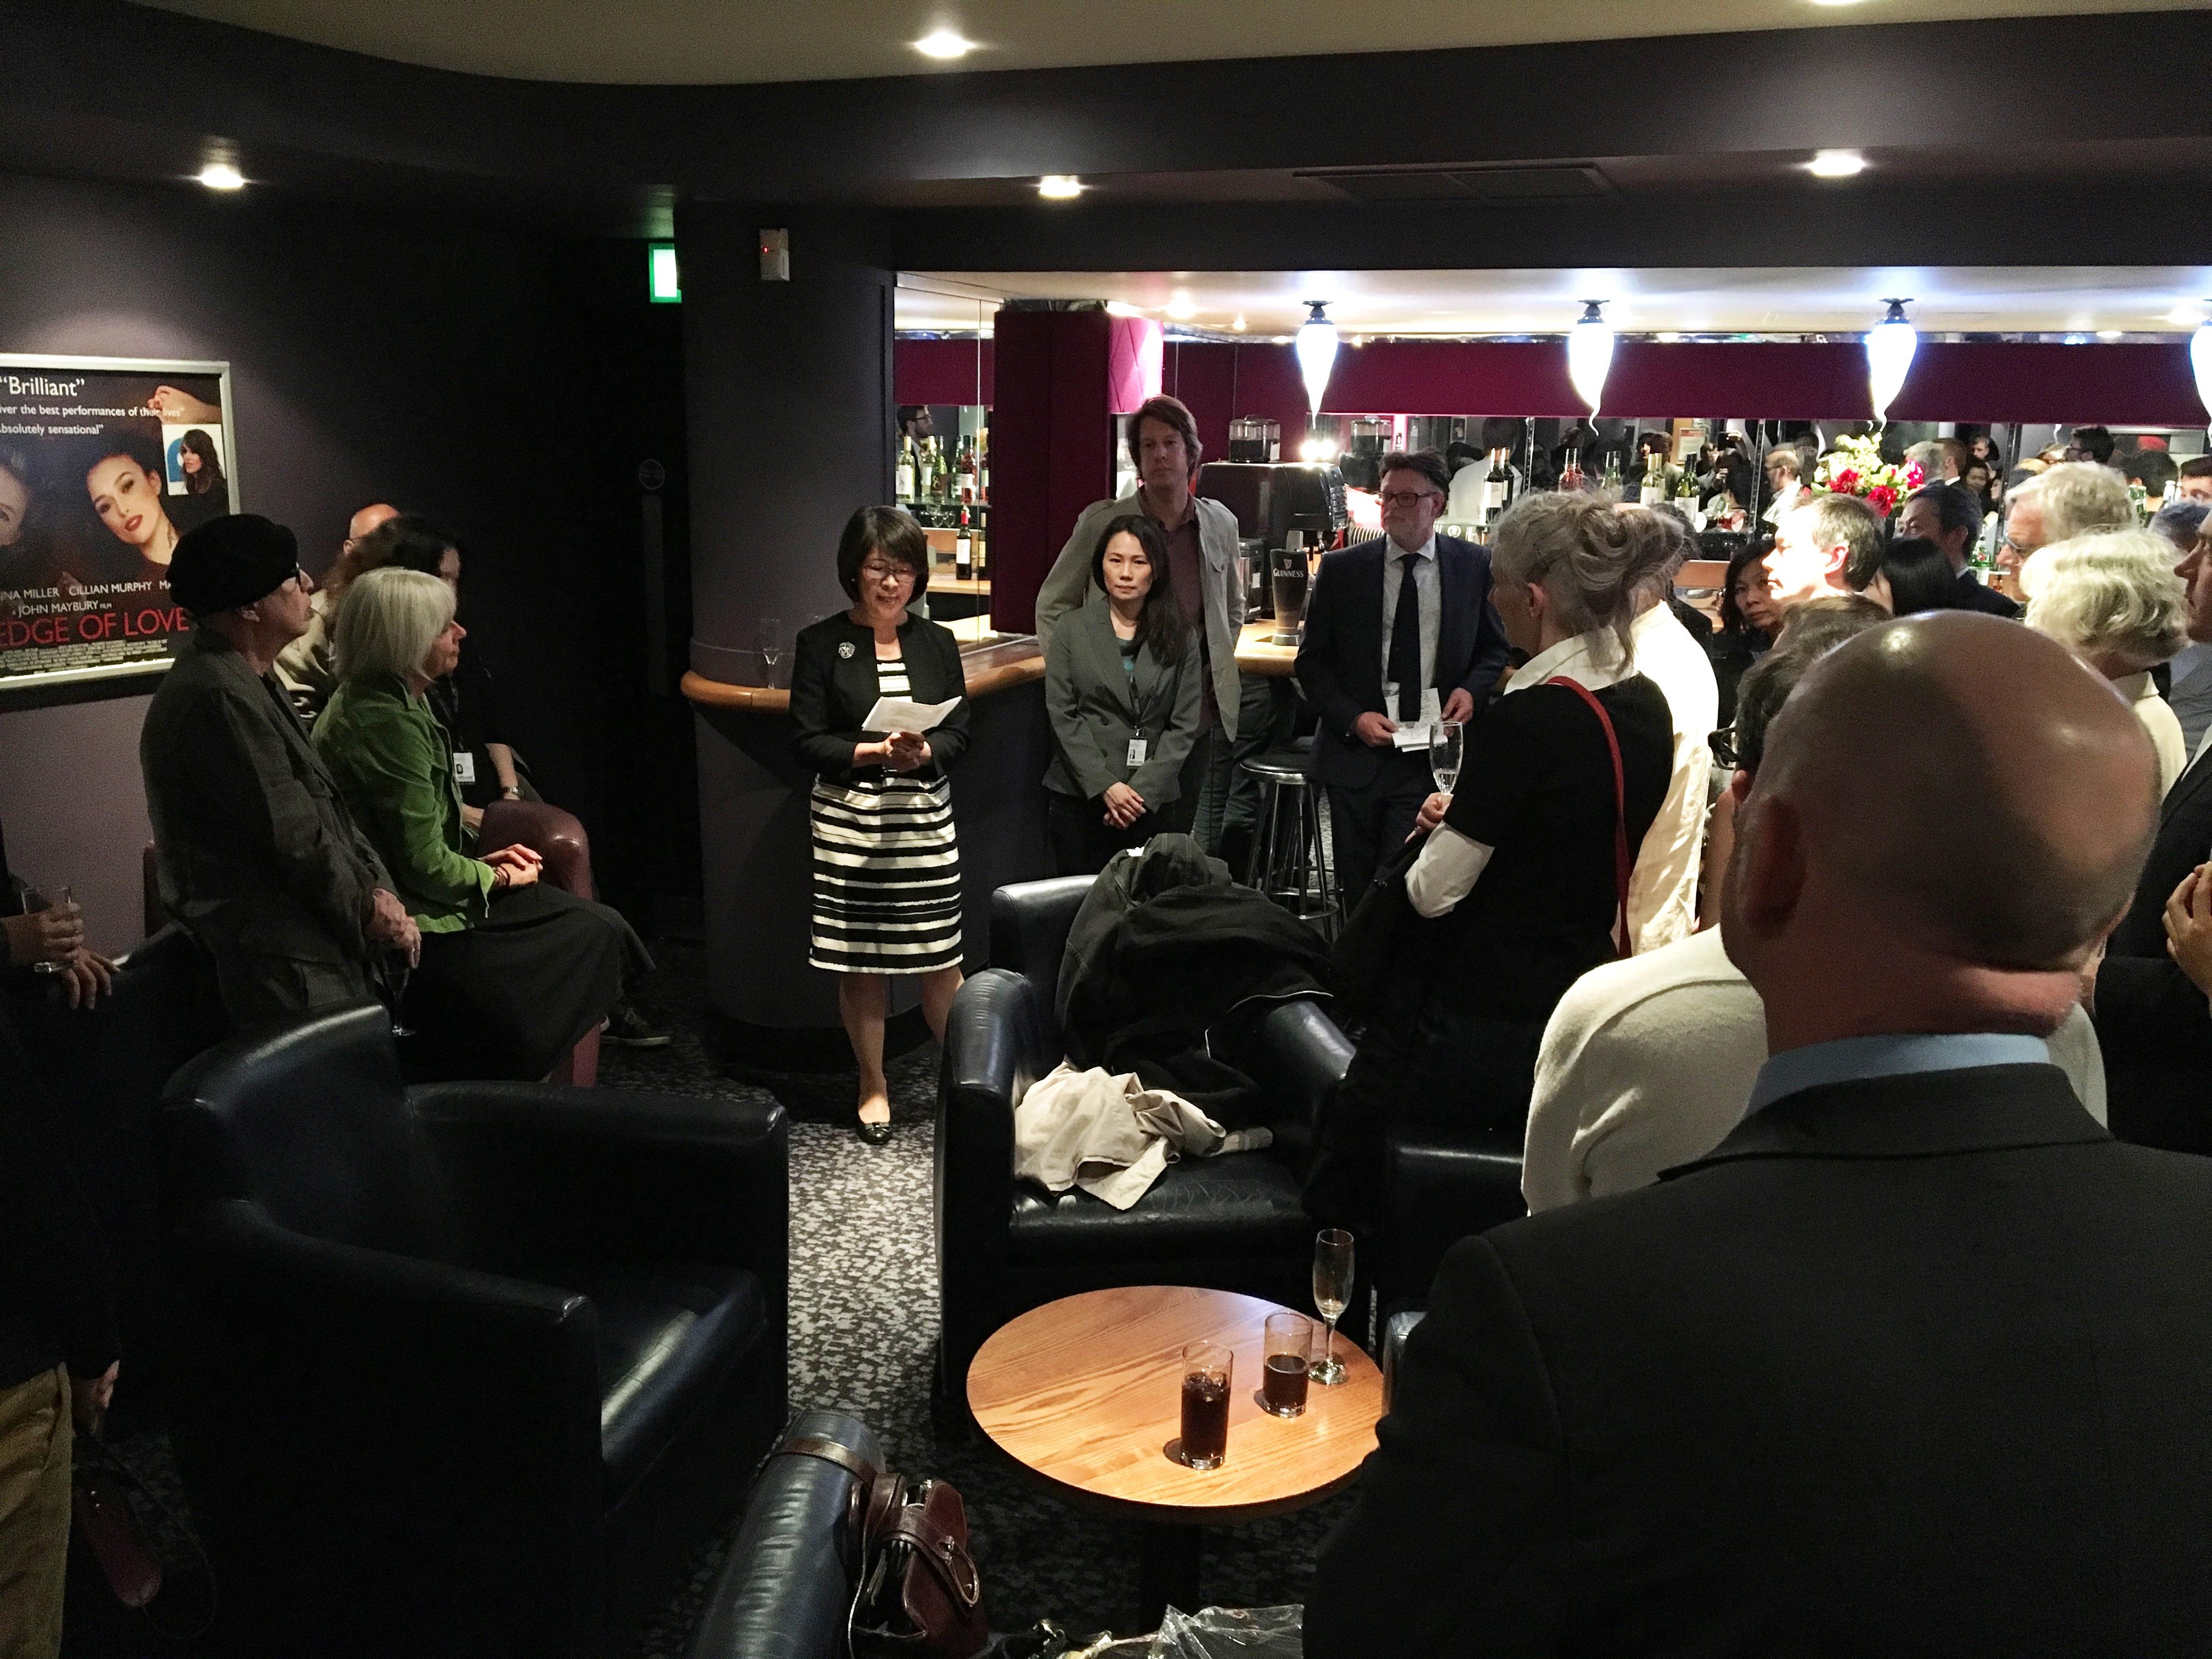 Director General Jane Hsu gave welcome remarks at the premiere's reception on the 26th of June 2017 at Edinburgh Cineworld Cinemas.